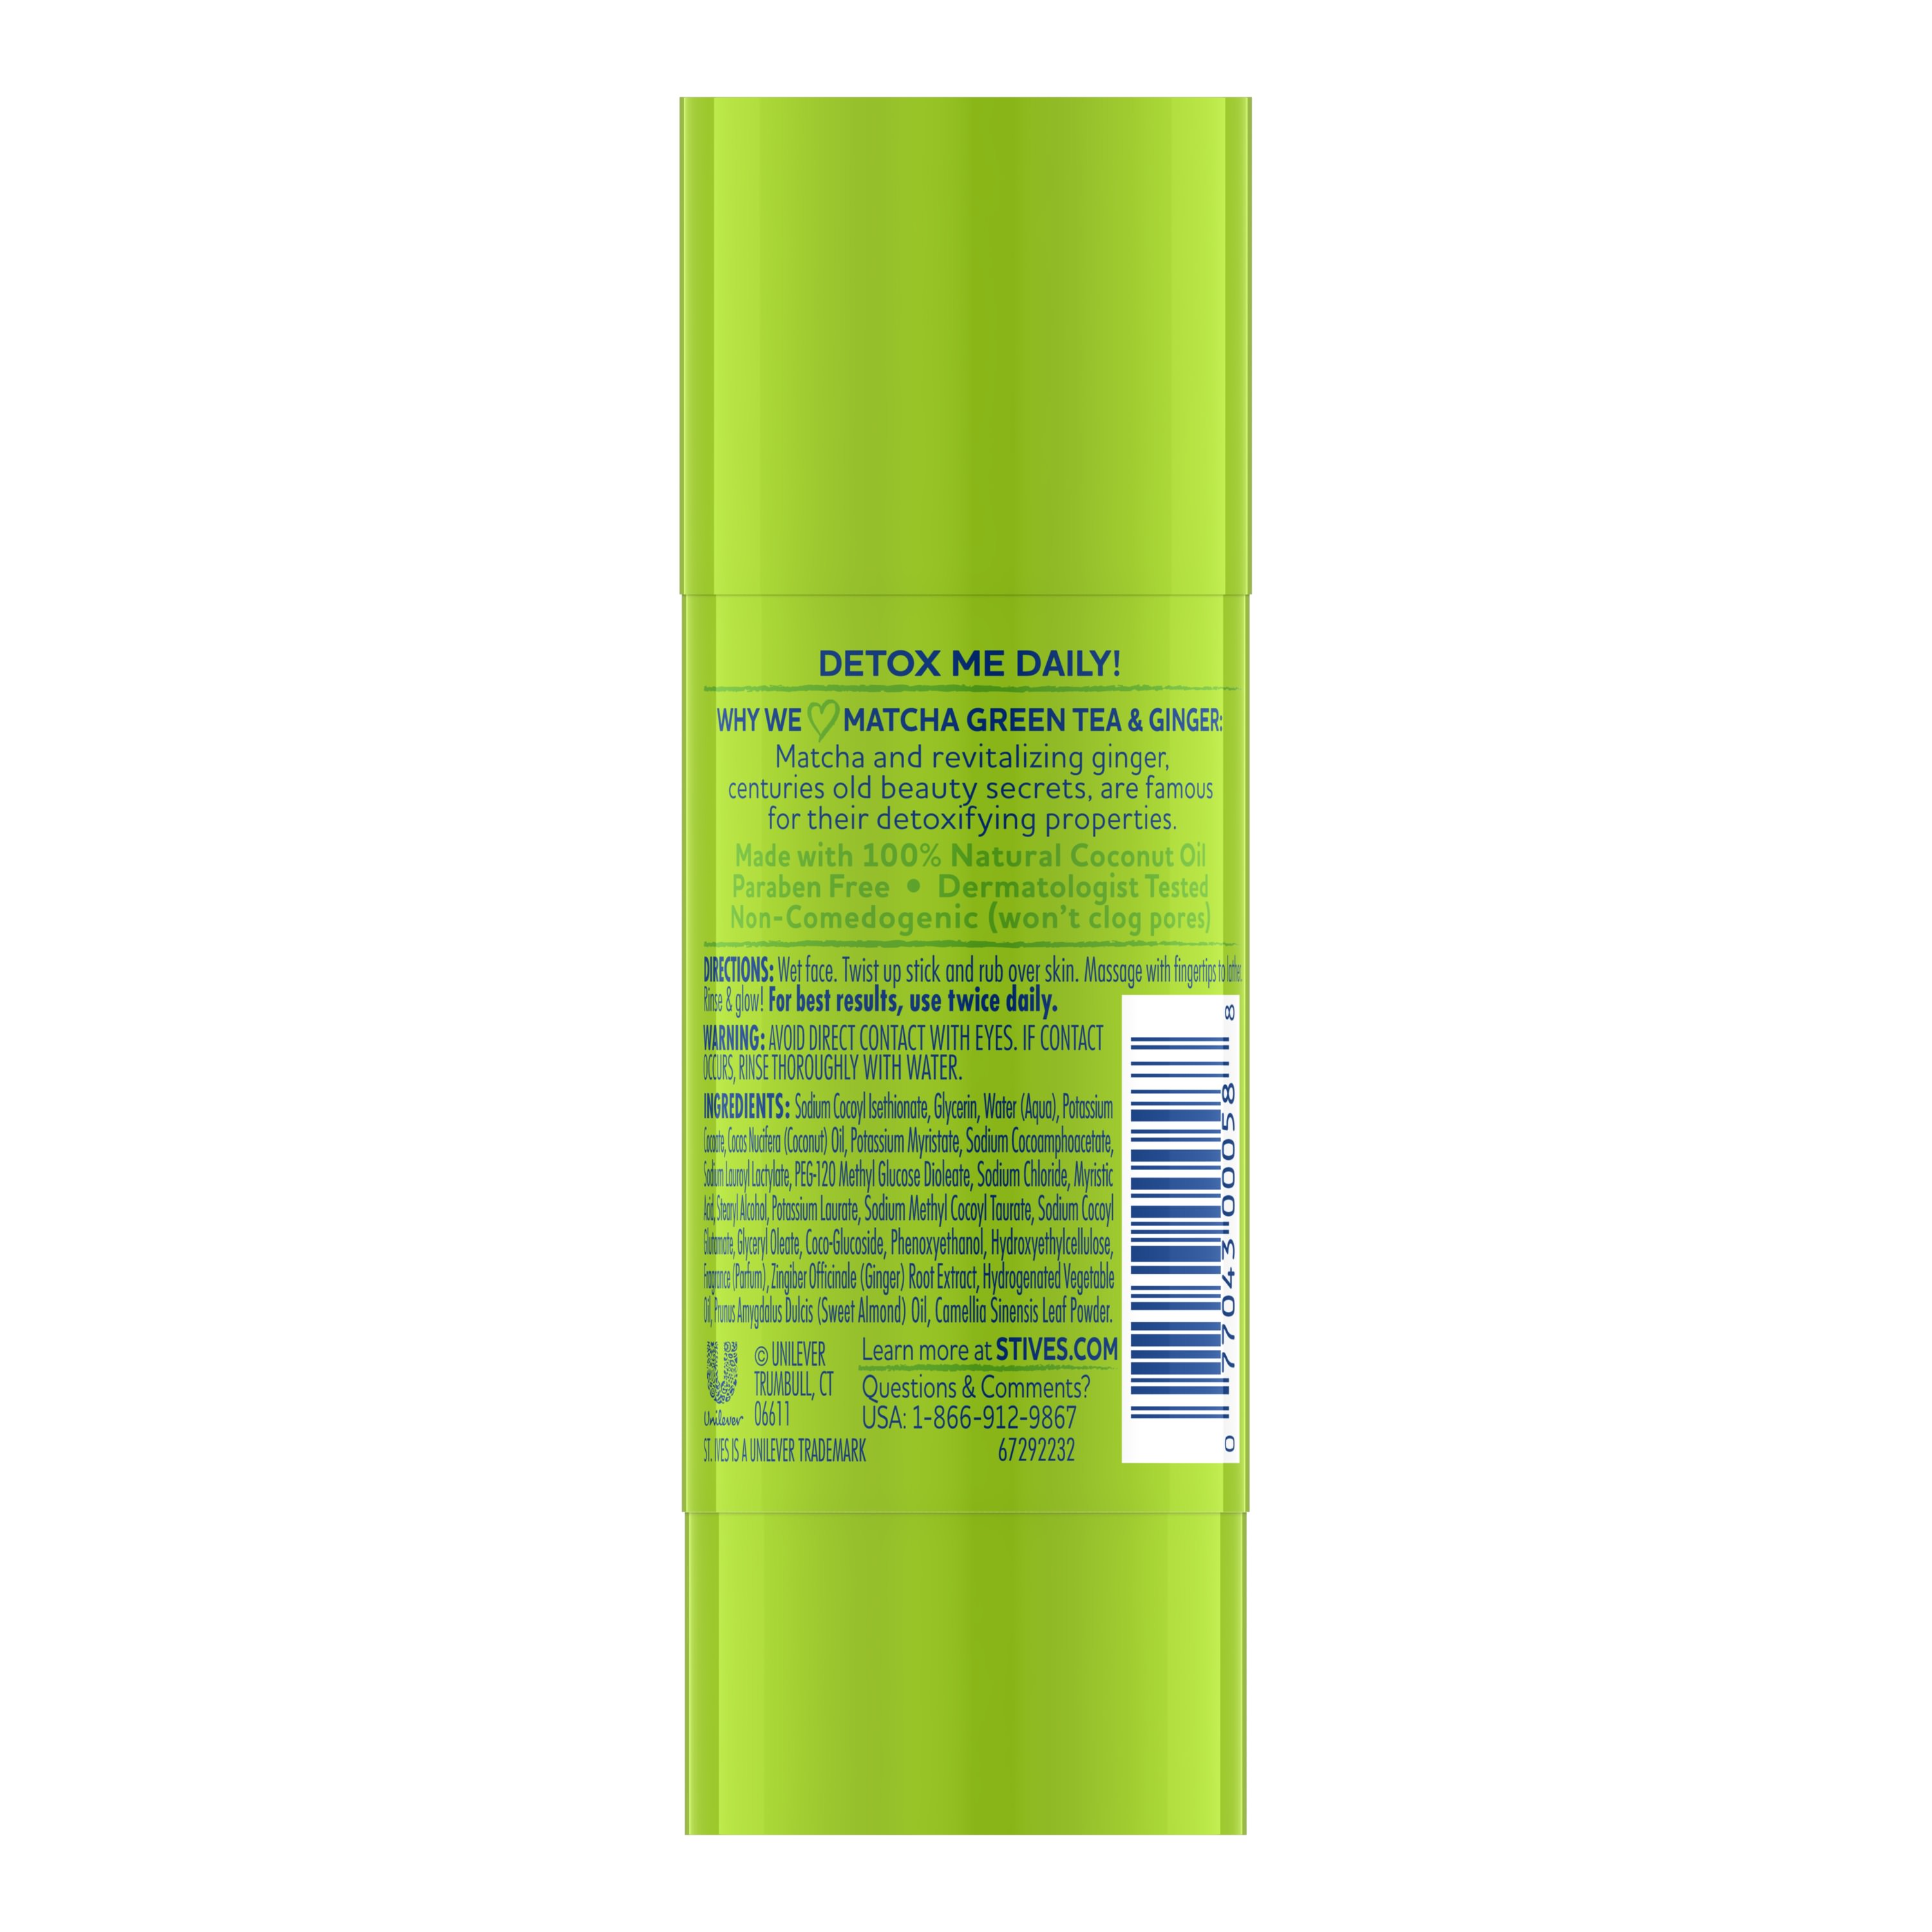 St. Ives Matcha Green Tea and Ginger Cleansing Stick, 1.6 oz - image 3 of 5